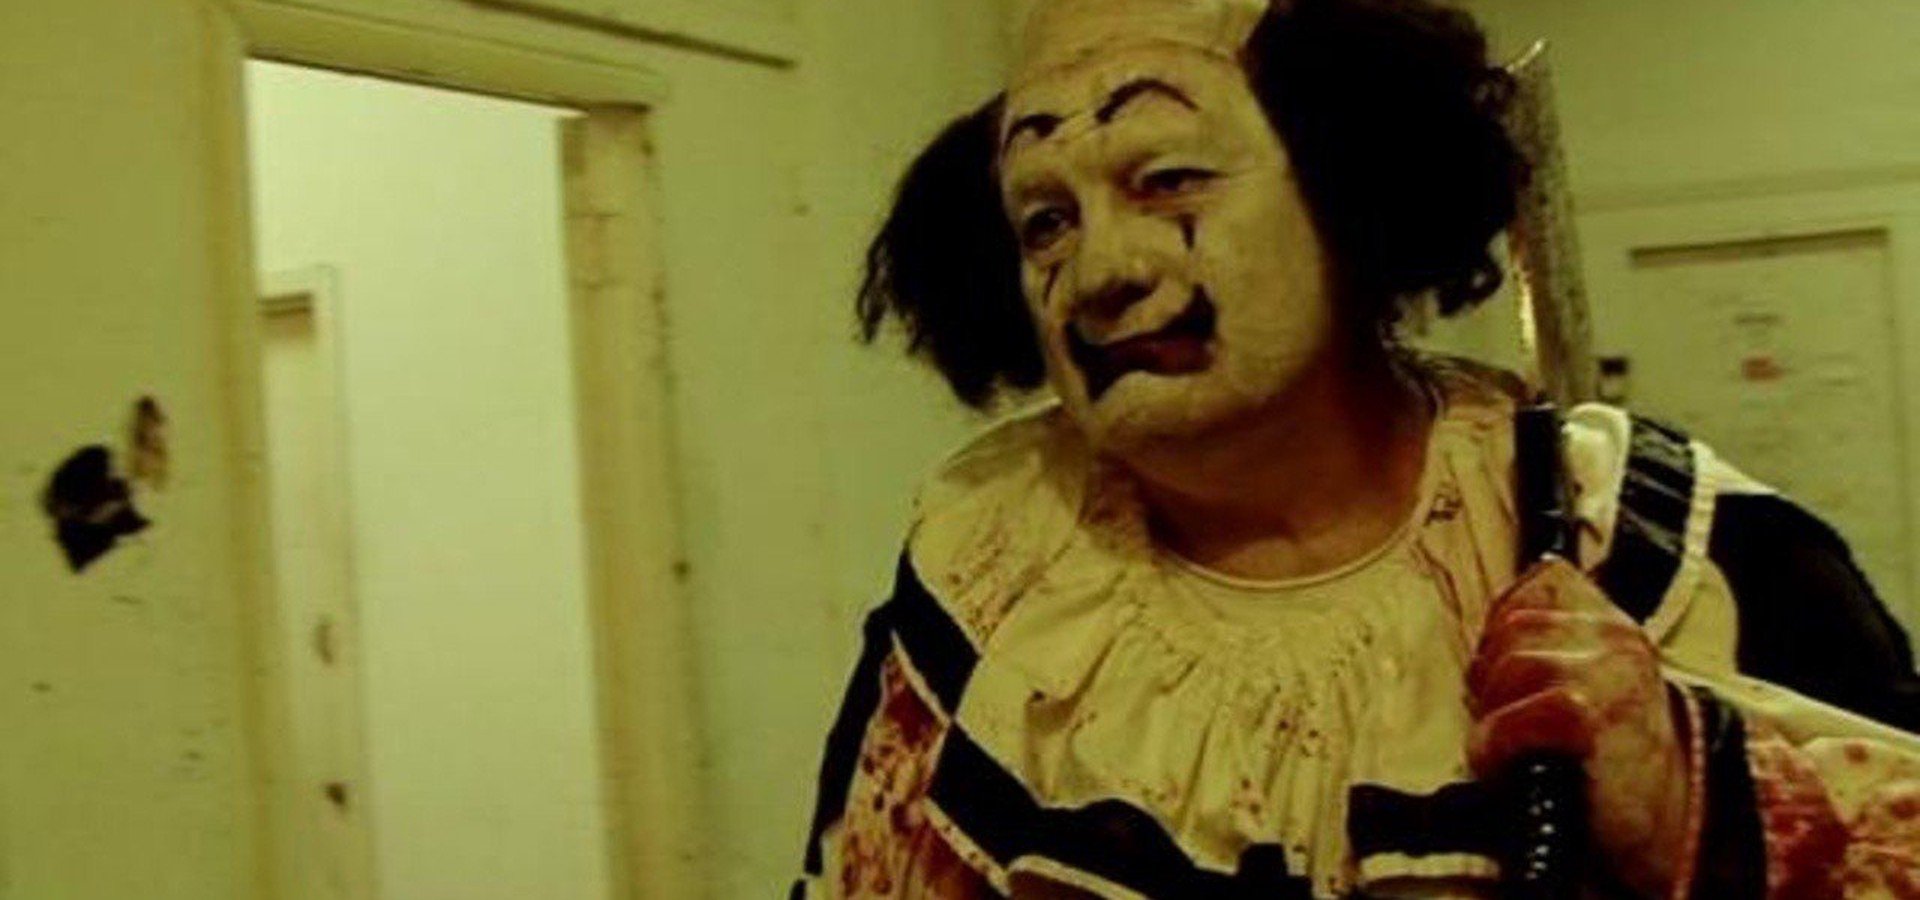 Zombie Force Sex Movie - 7 horror movies about clowns you can stream right now